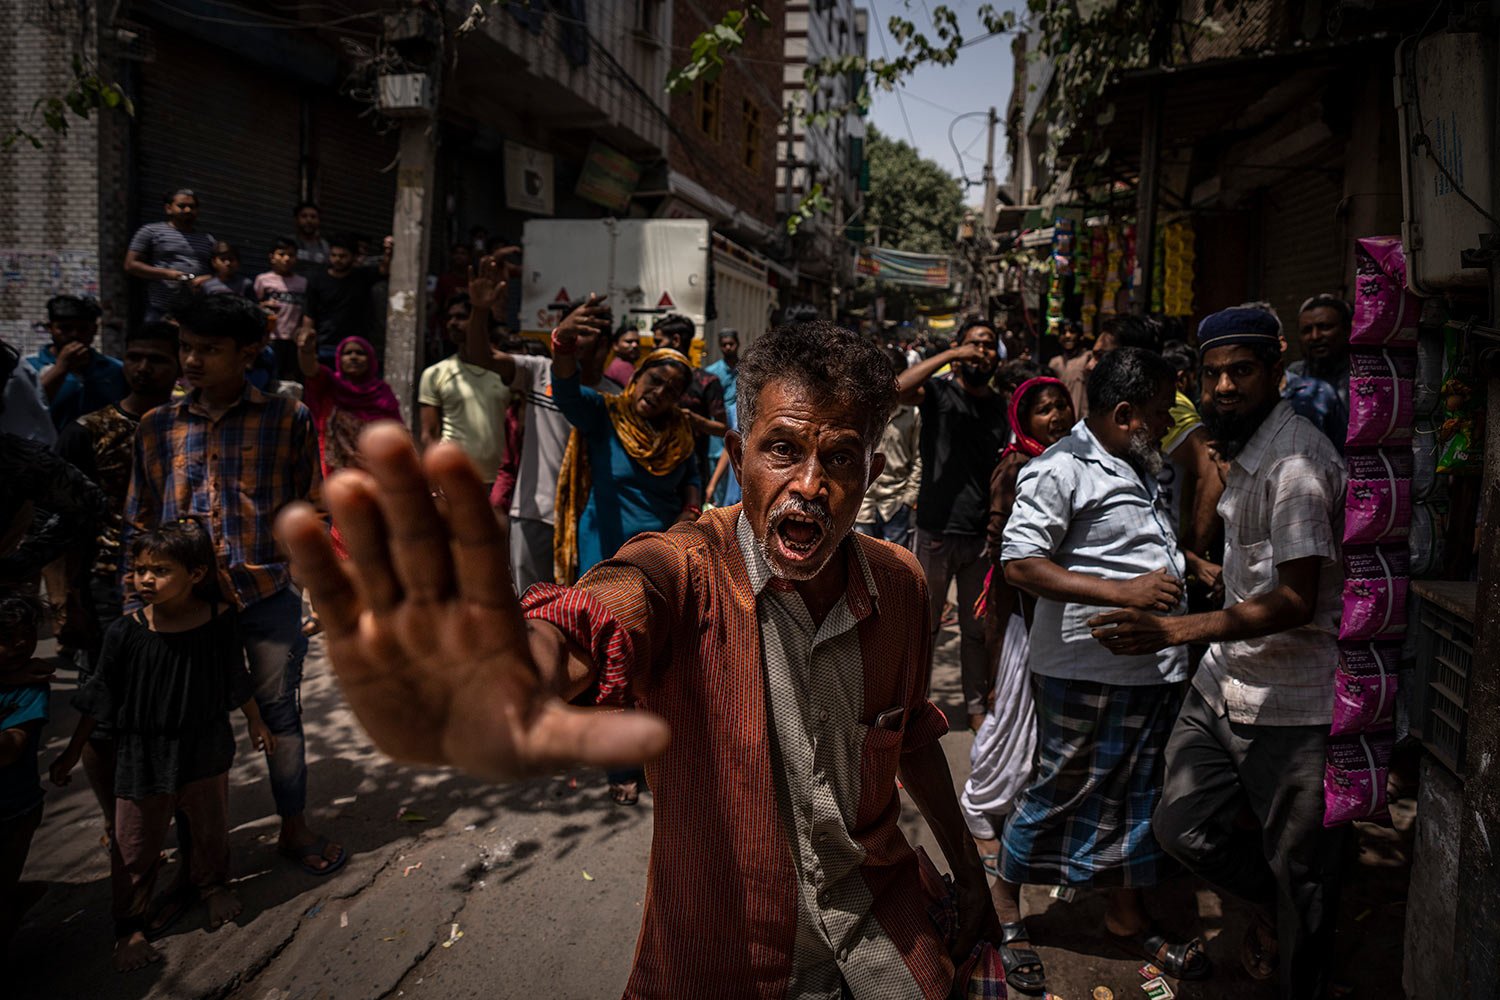  An agitated Muslim resident asks media to leave alleging them of distorting facts, during the demolition of Muslim-owned shops at the site of Saturday's communal violence, in New Delhi's northwest Jahangirpuri neighborhood, in New Delhi, India, Wedn